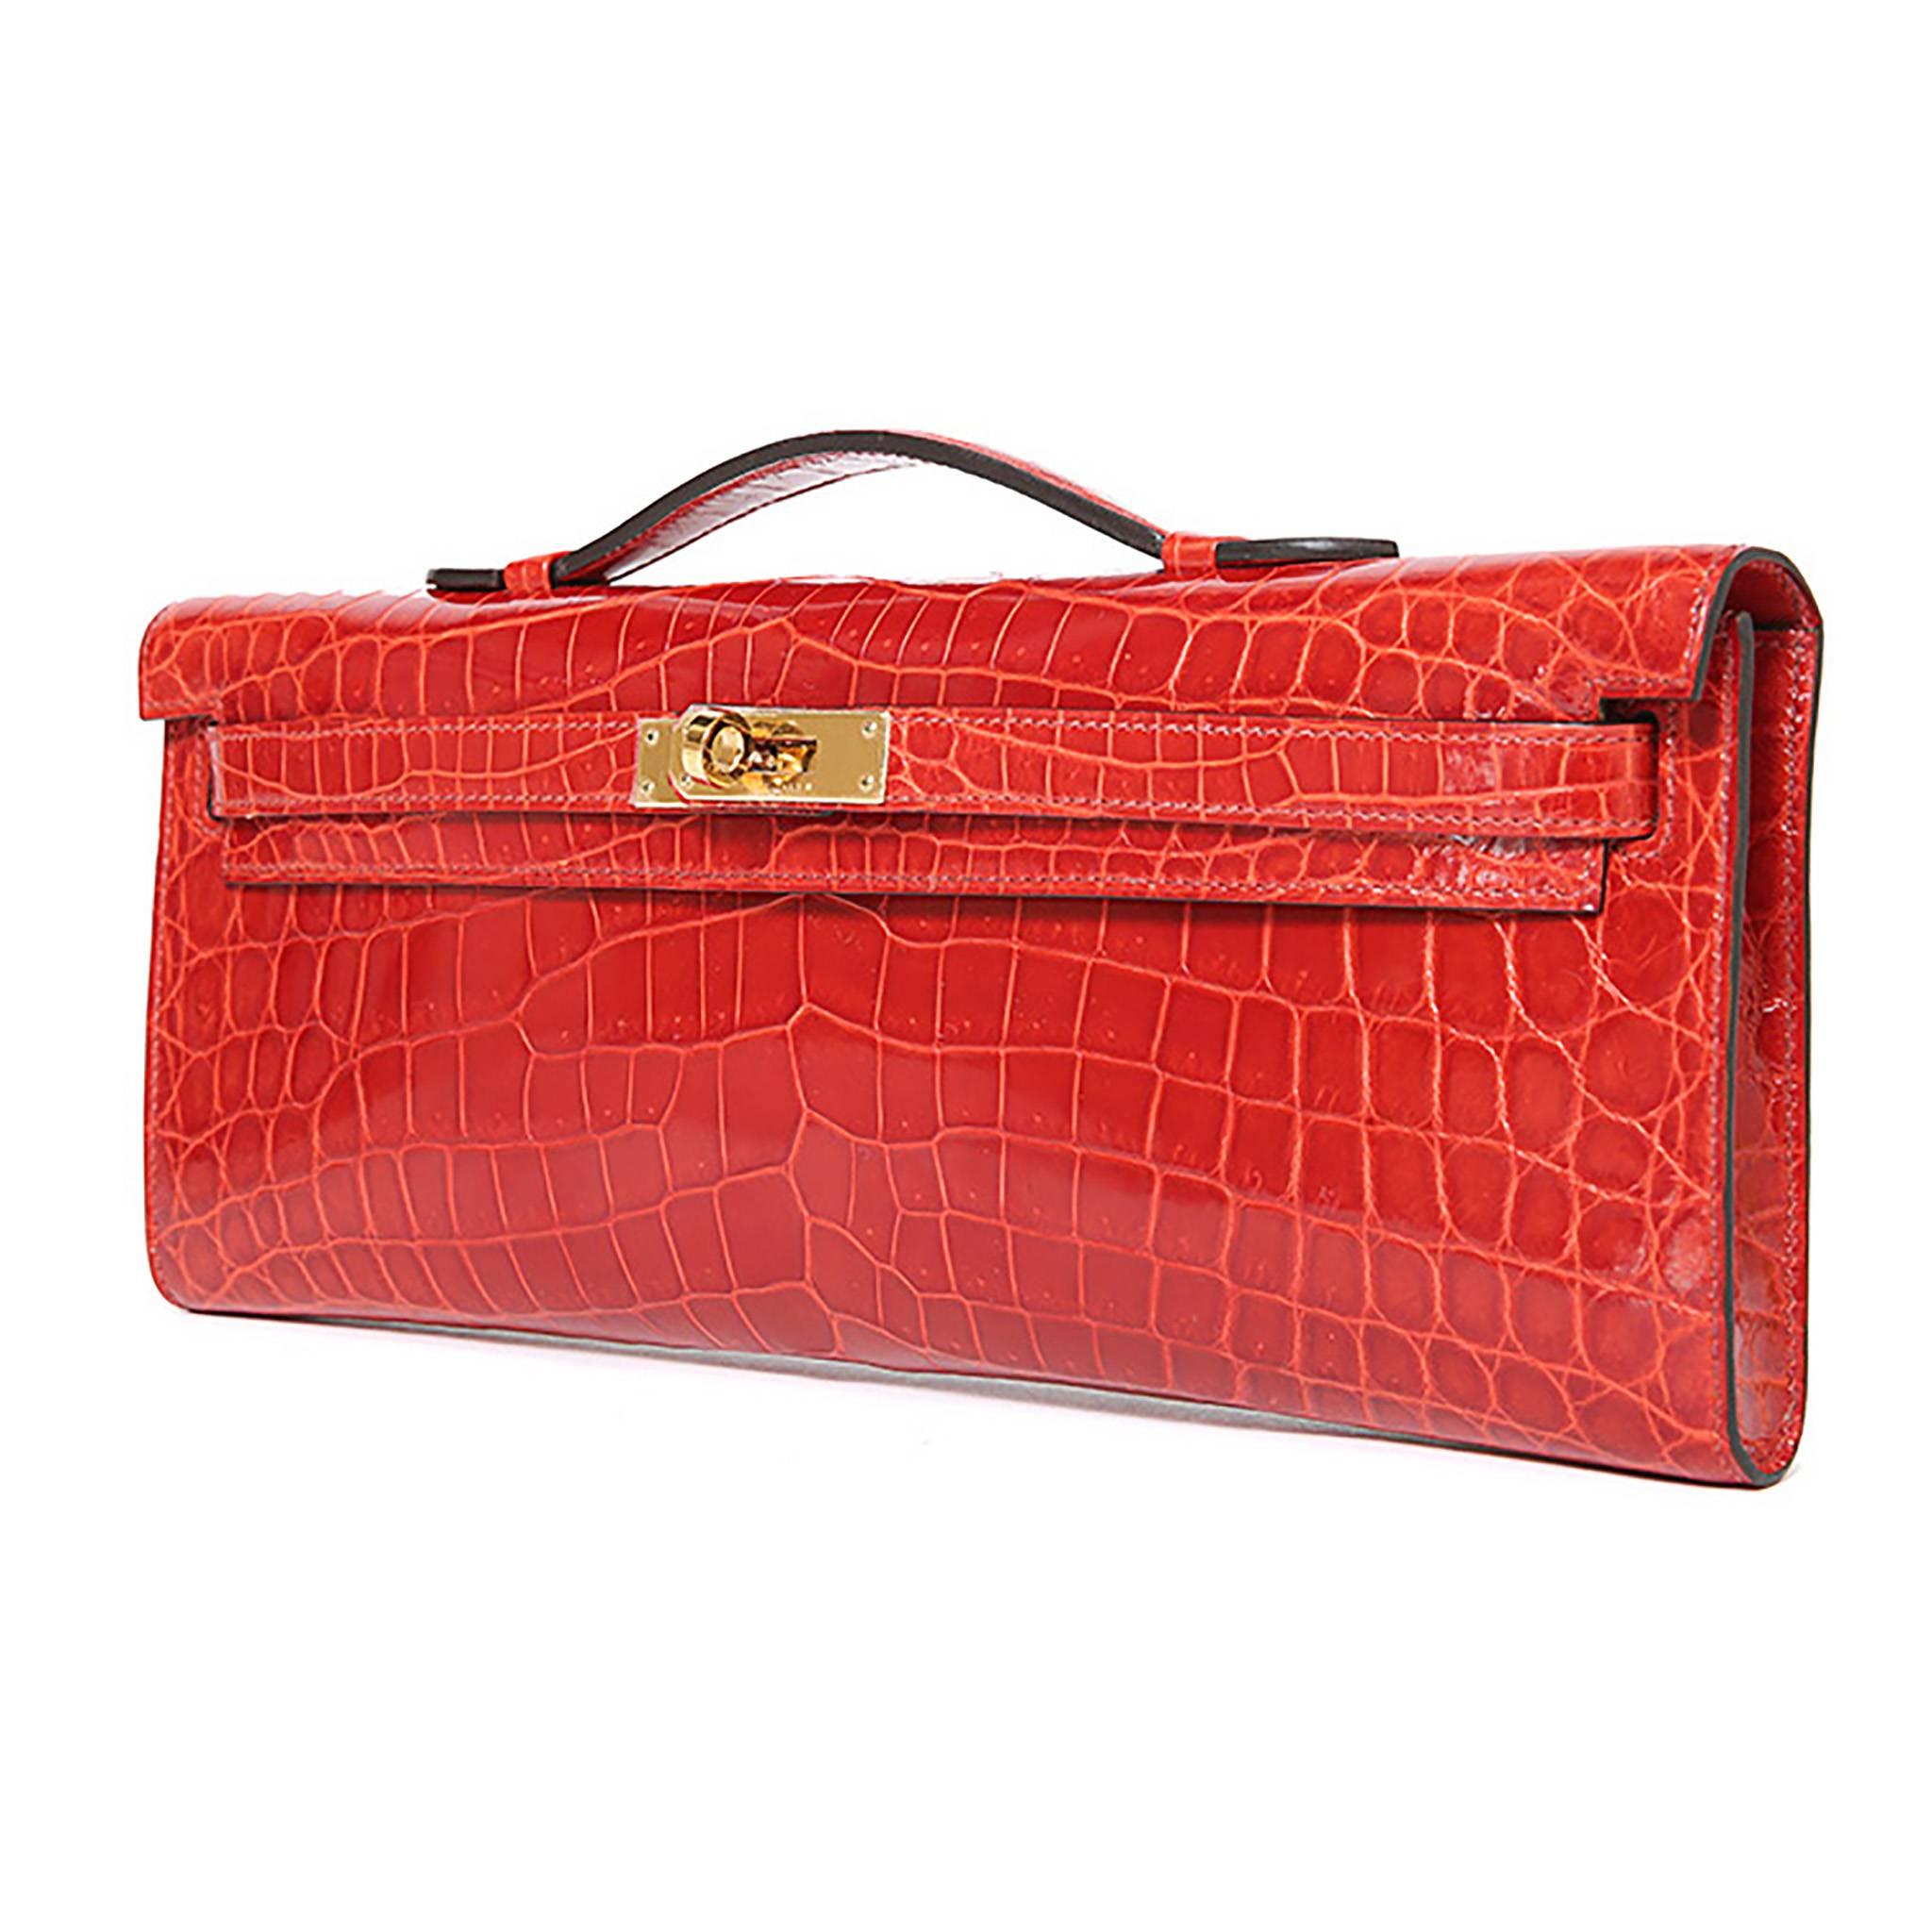 Hermes Kelly Cut Crocodilus Niloticus Leather Red Color GHW 1